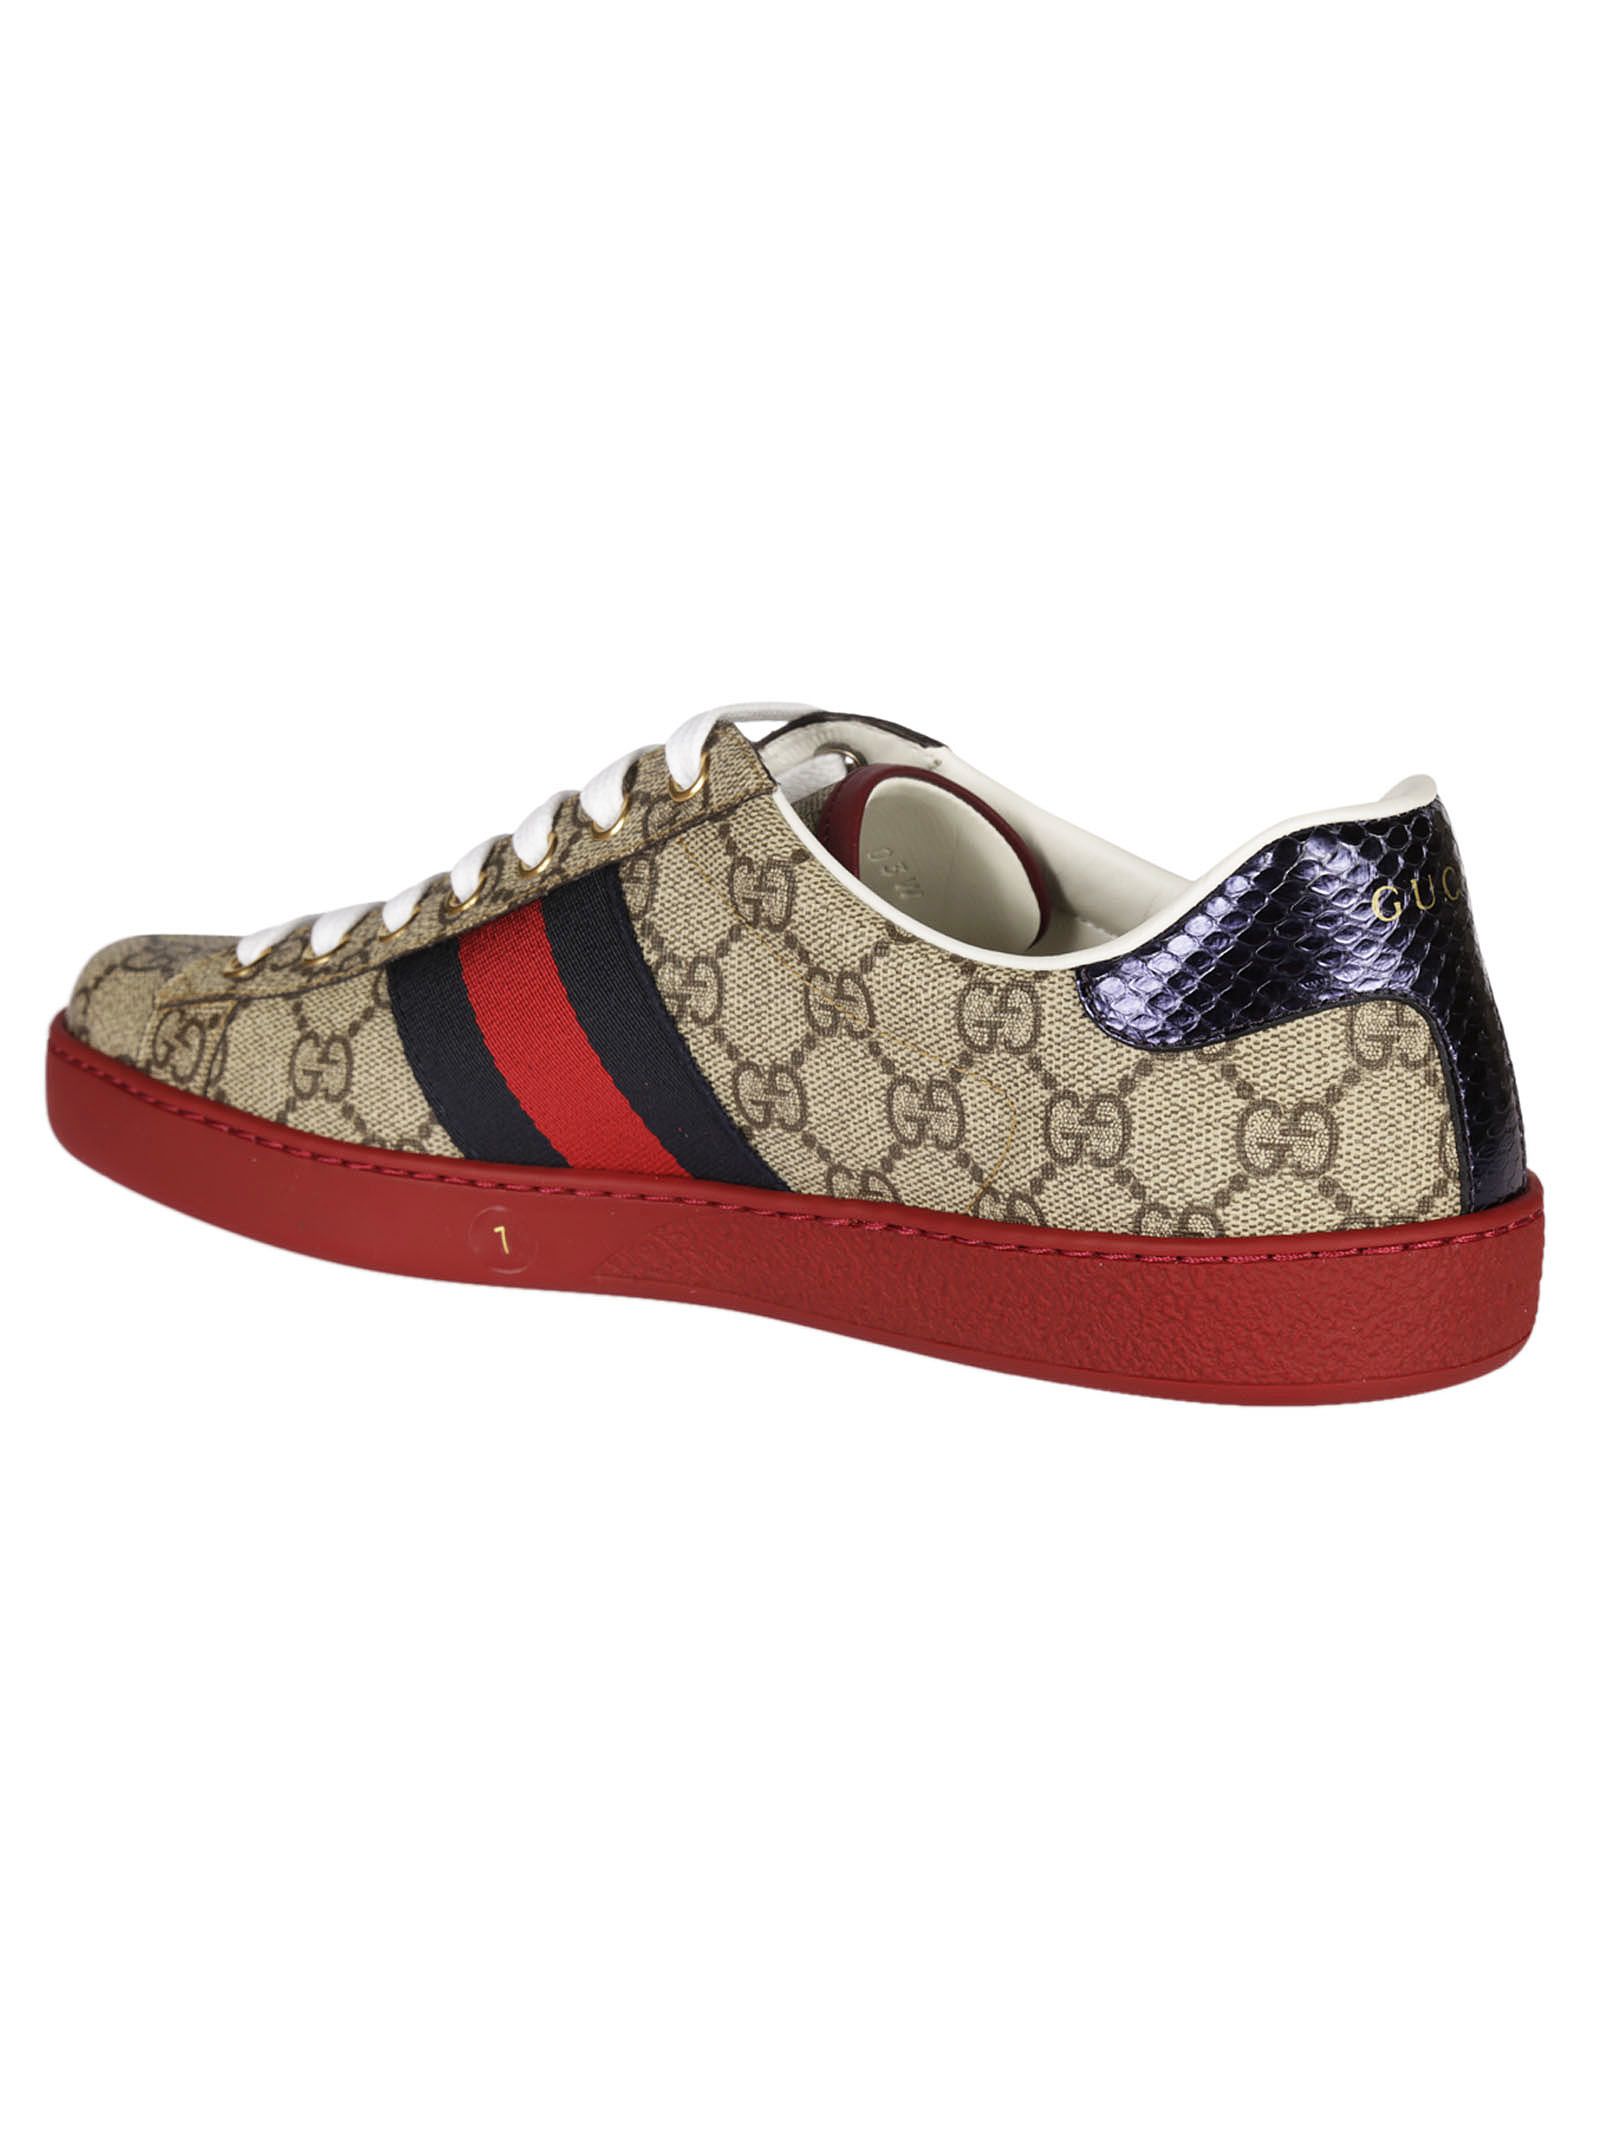 italist | Best price in the market for Gucci Gucci Ace GG Supreme Sneakers - Beige - 8677522 ...